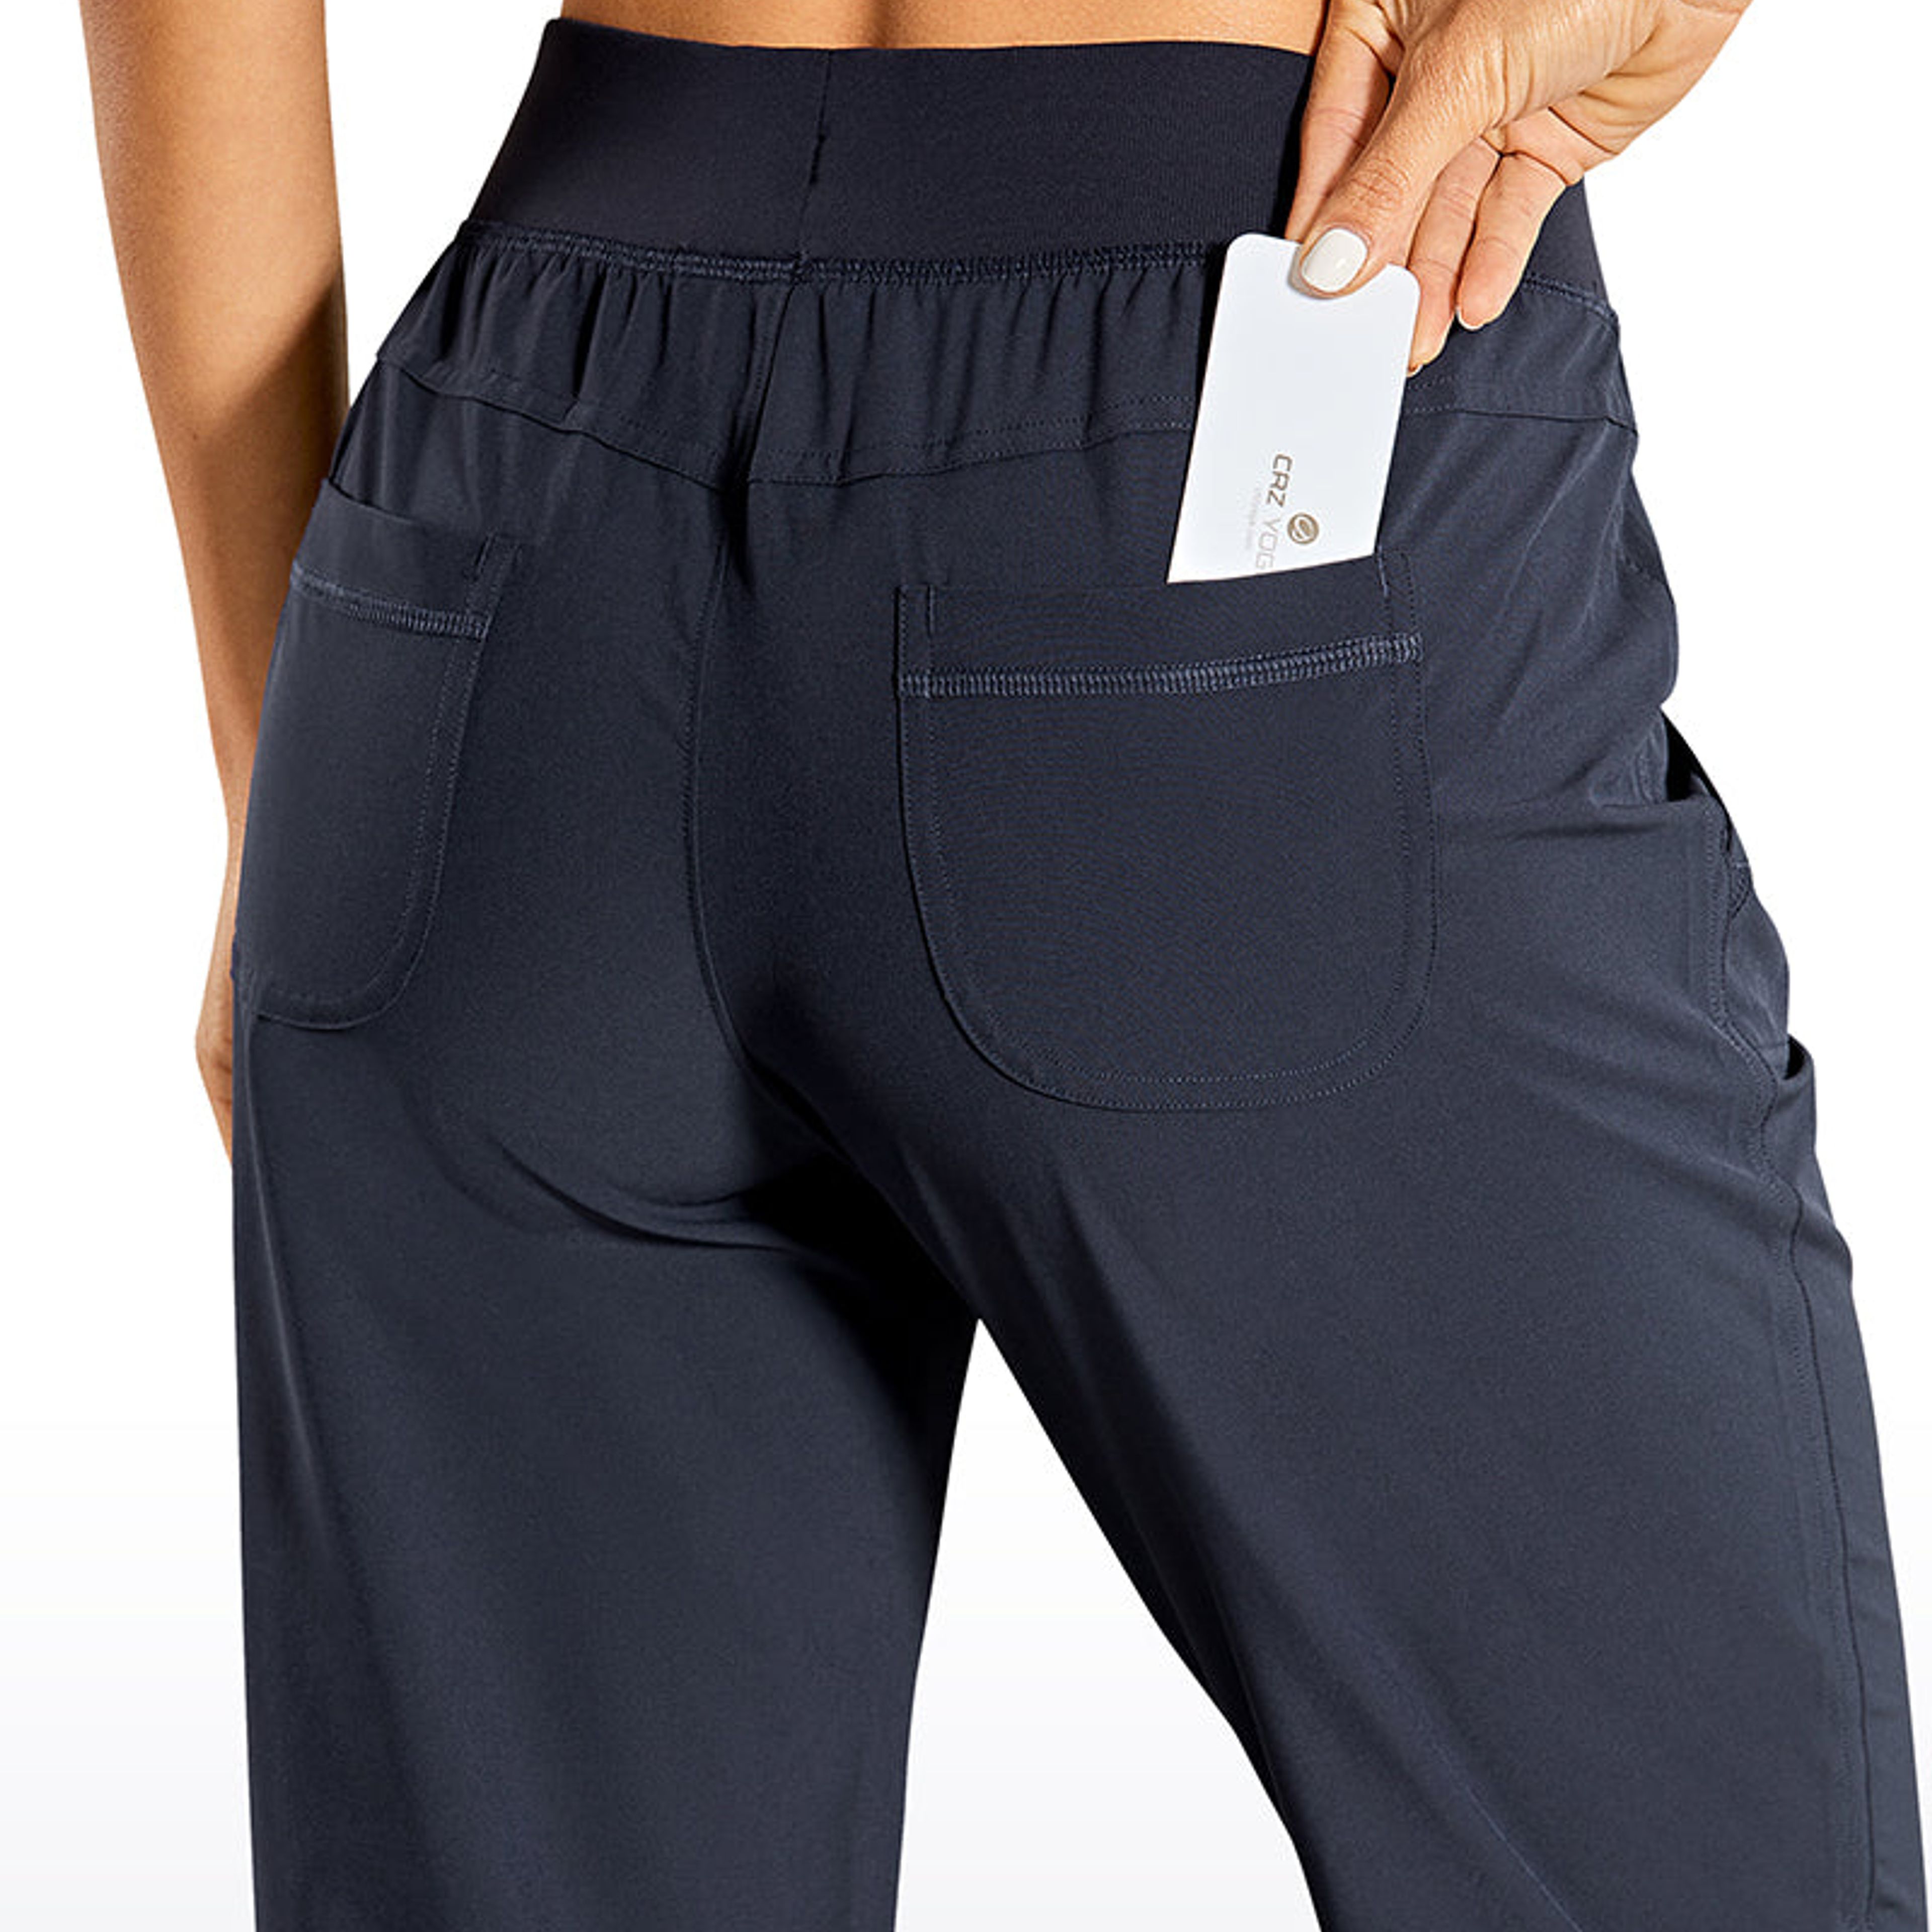 Crz Yoga Feathery-Fit Drawstring Jogger with Pockets 28'' - Flat Waistband  on Marmalade